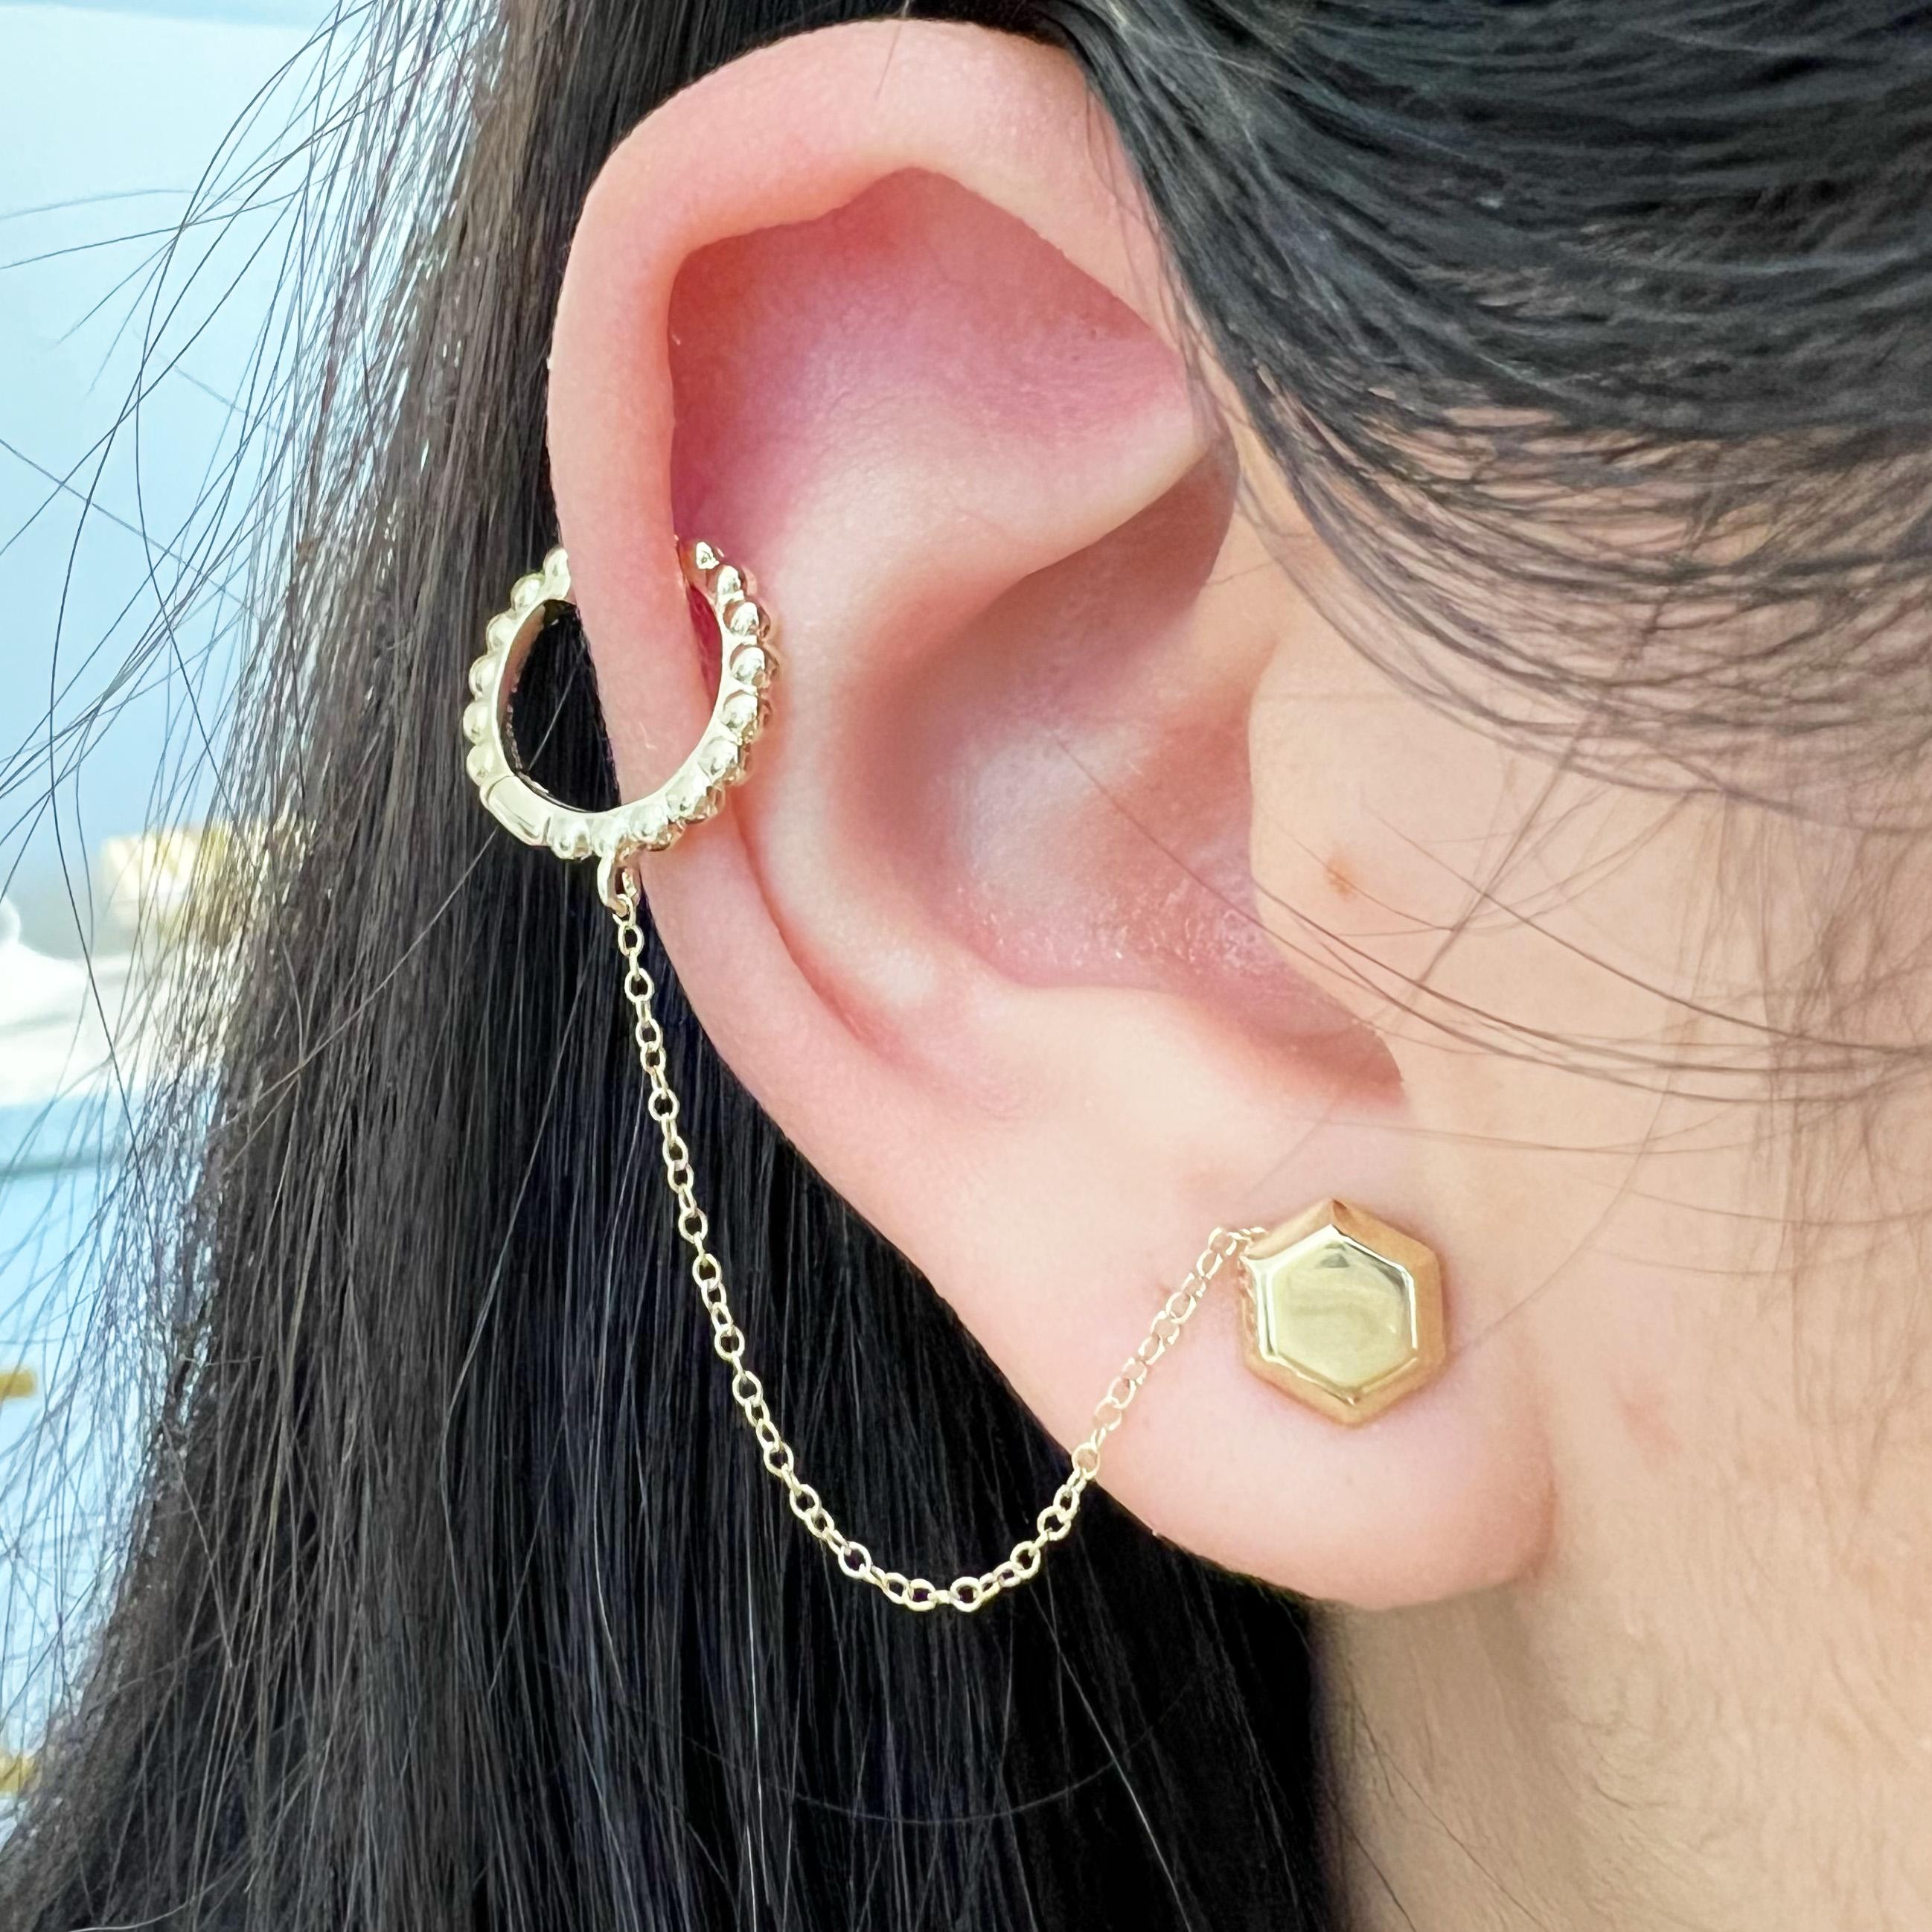 Versatility and style are top notch with this single chained ear cuff and hexagon stud combo! The mixed textures and geometry make it easy to mix the two parts with your other jewelry as you please! Wear the hexagon stud earring all by itself and